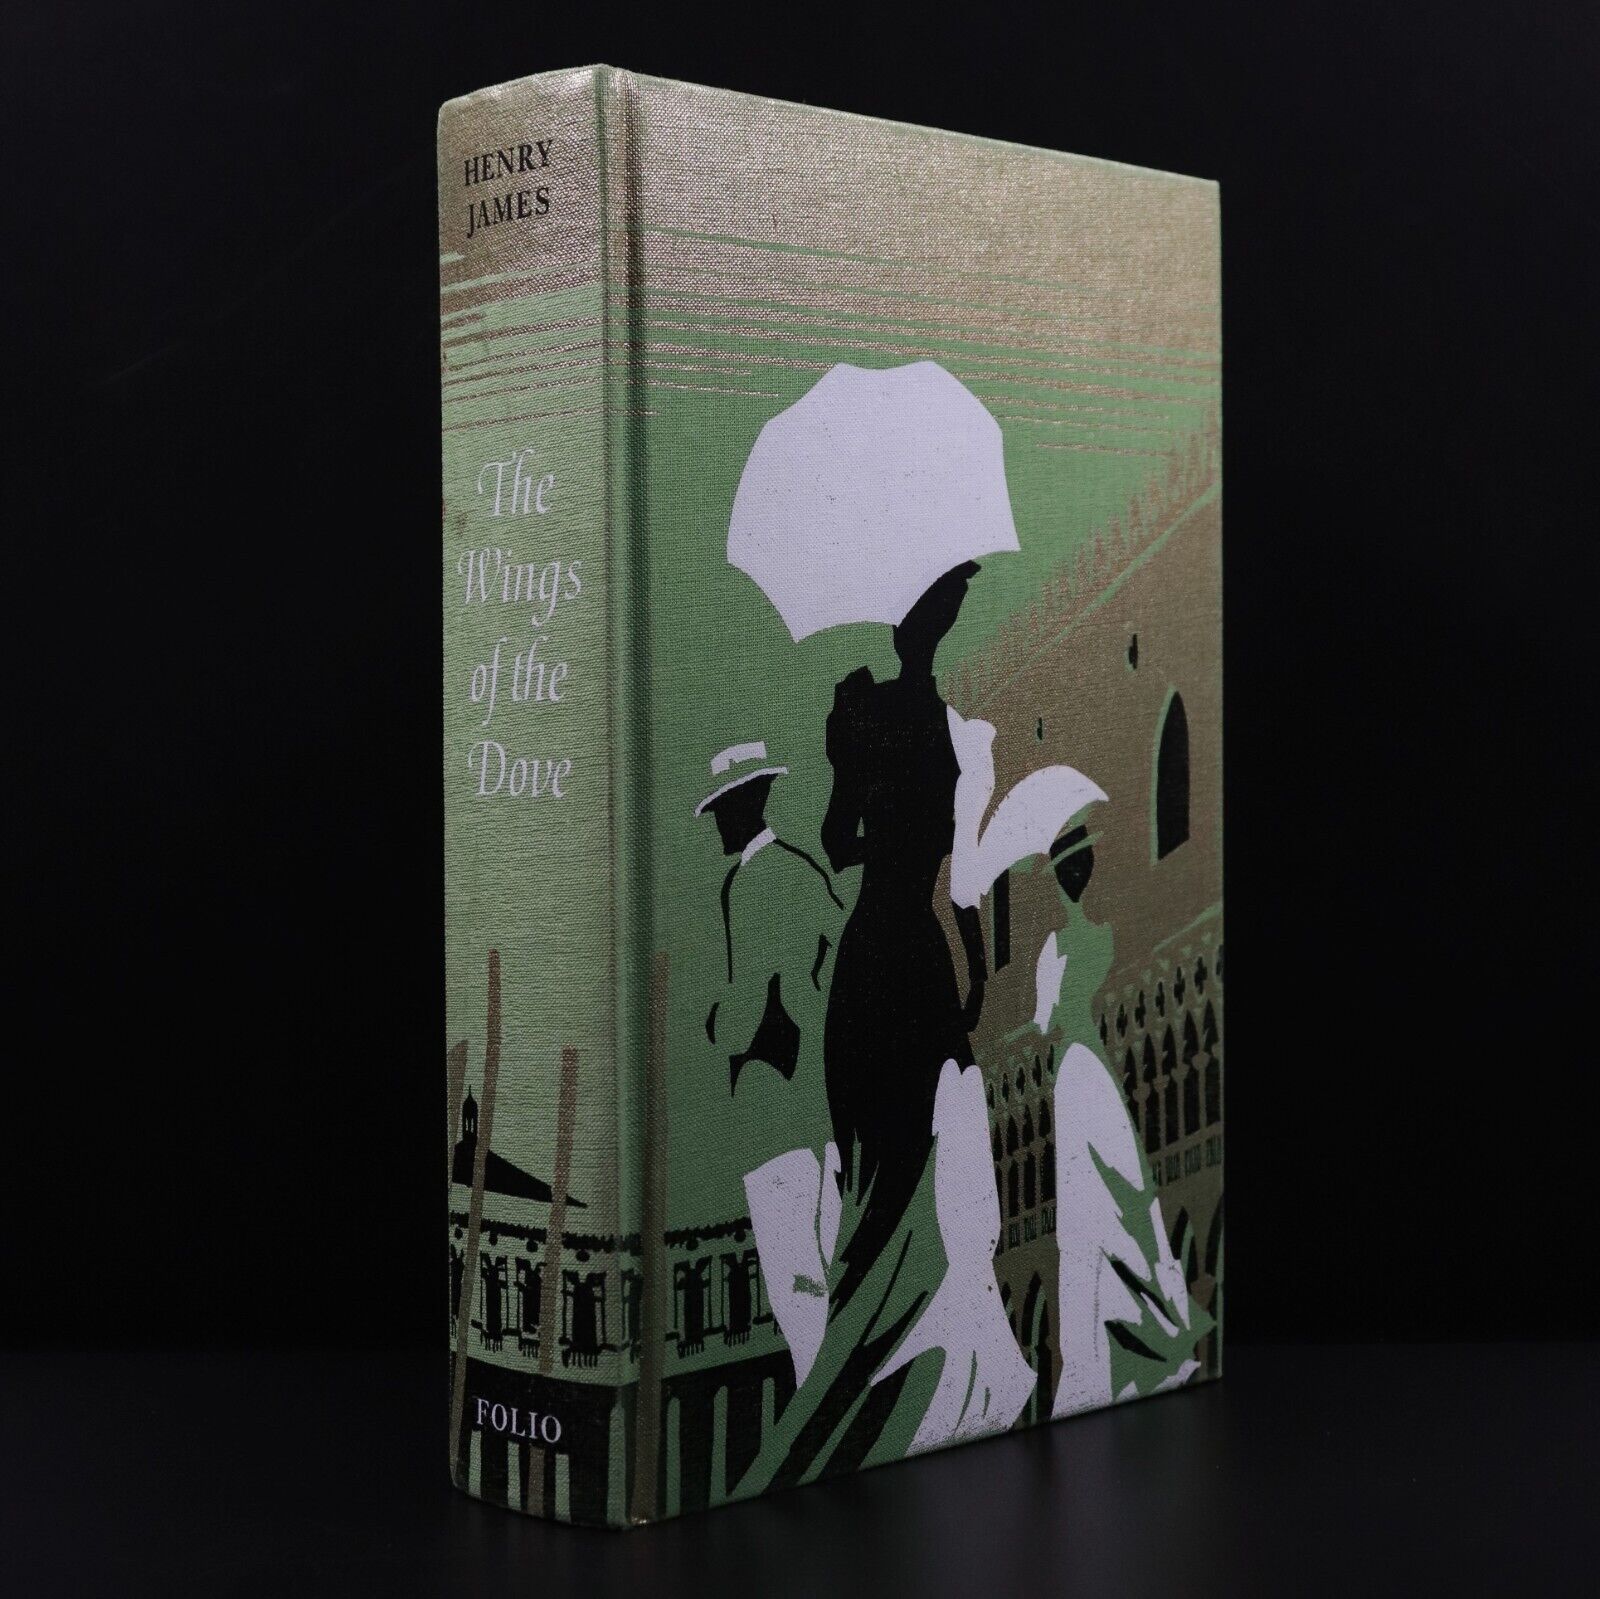 2005 The Wings Of The Dove by Henry James Folio Society Classic Fiction Book